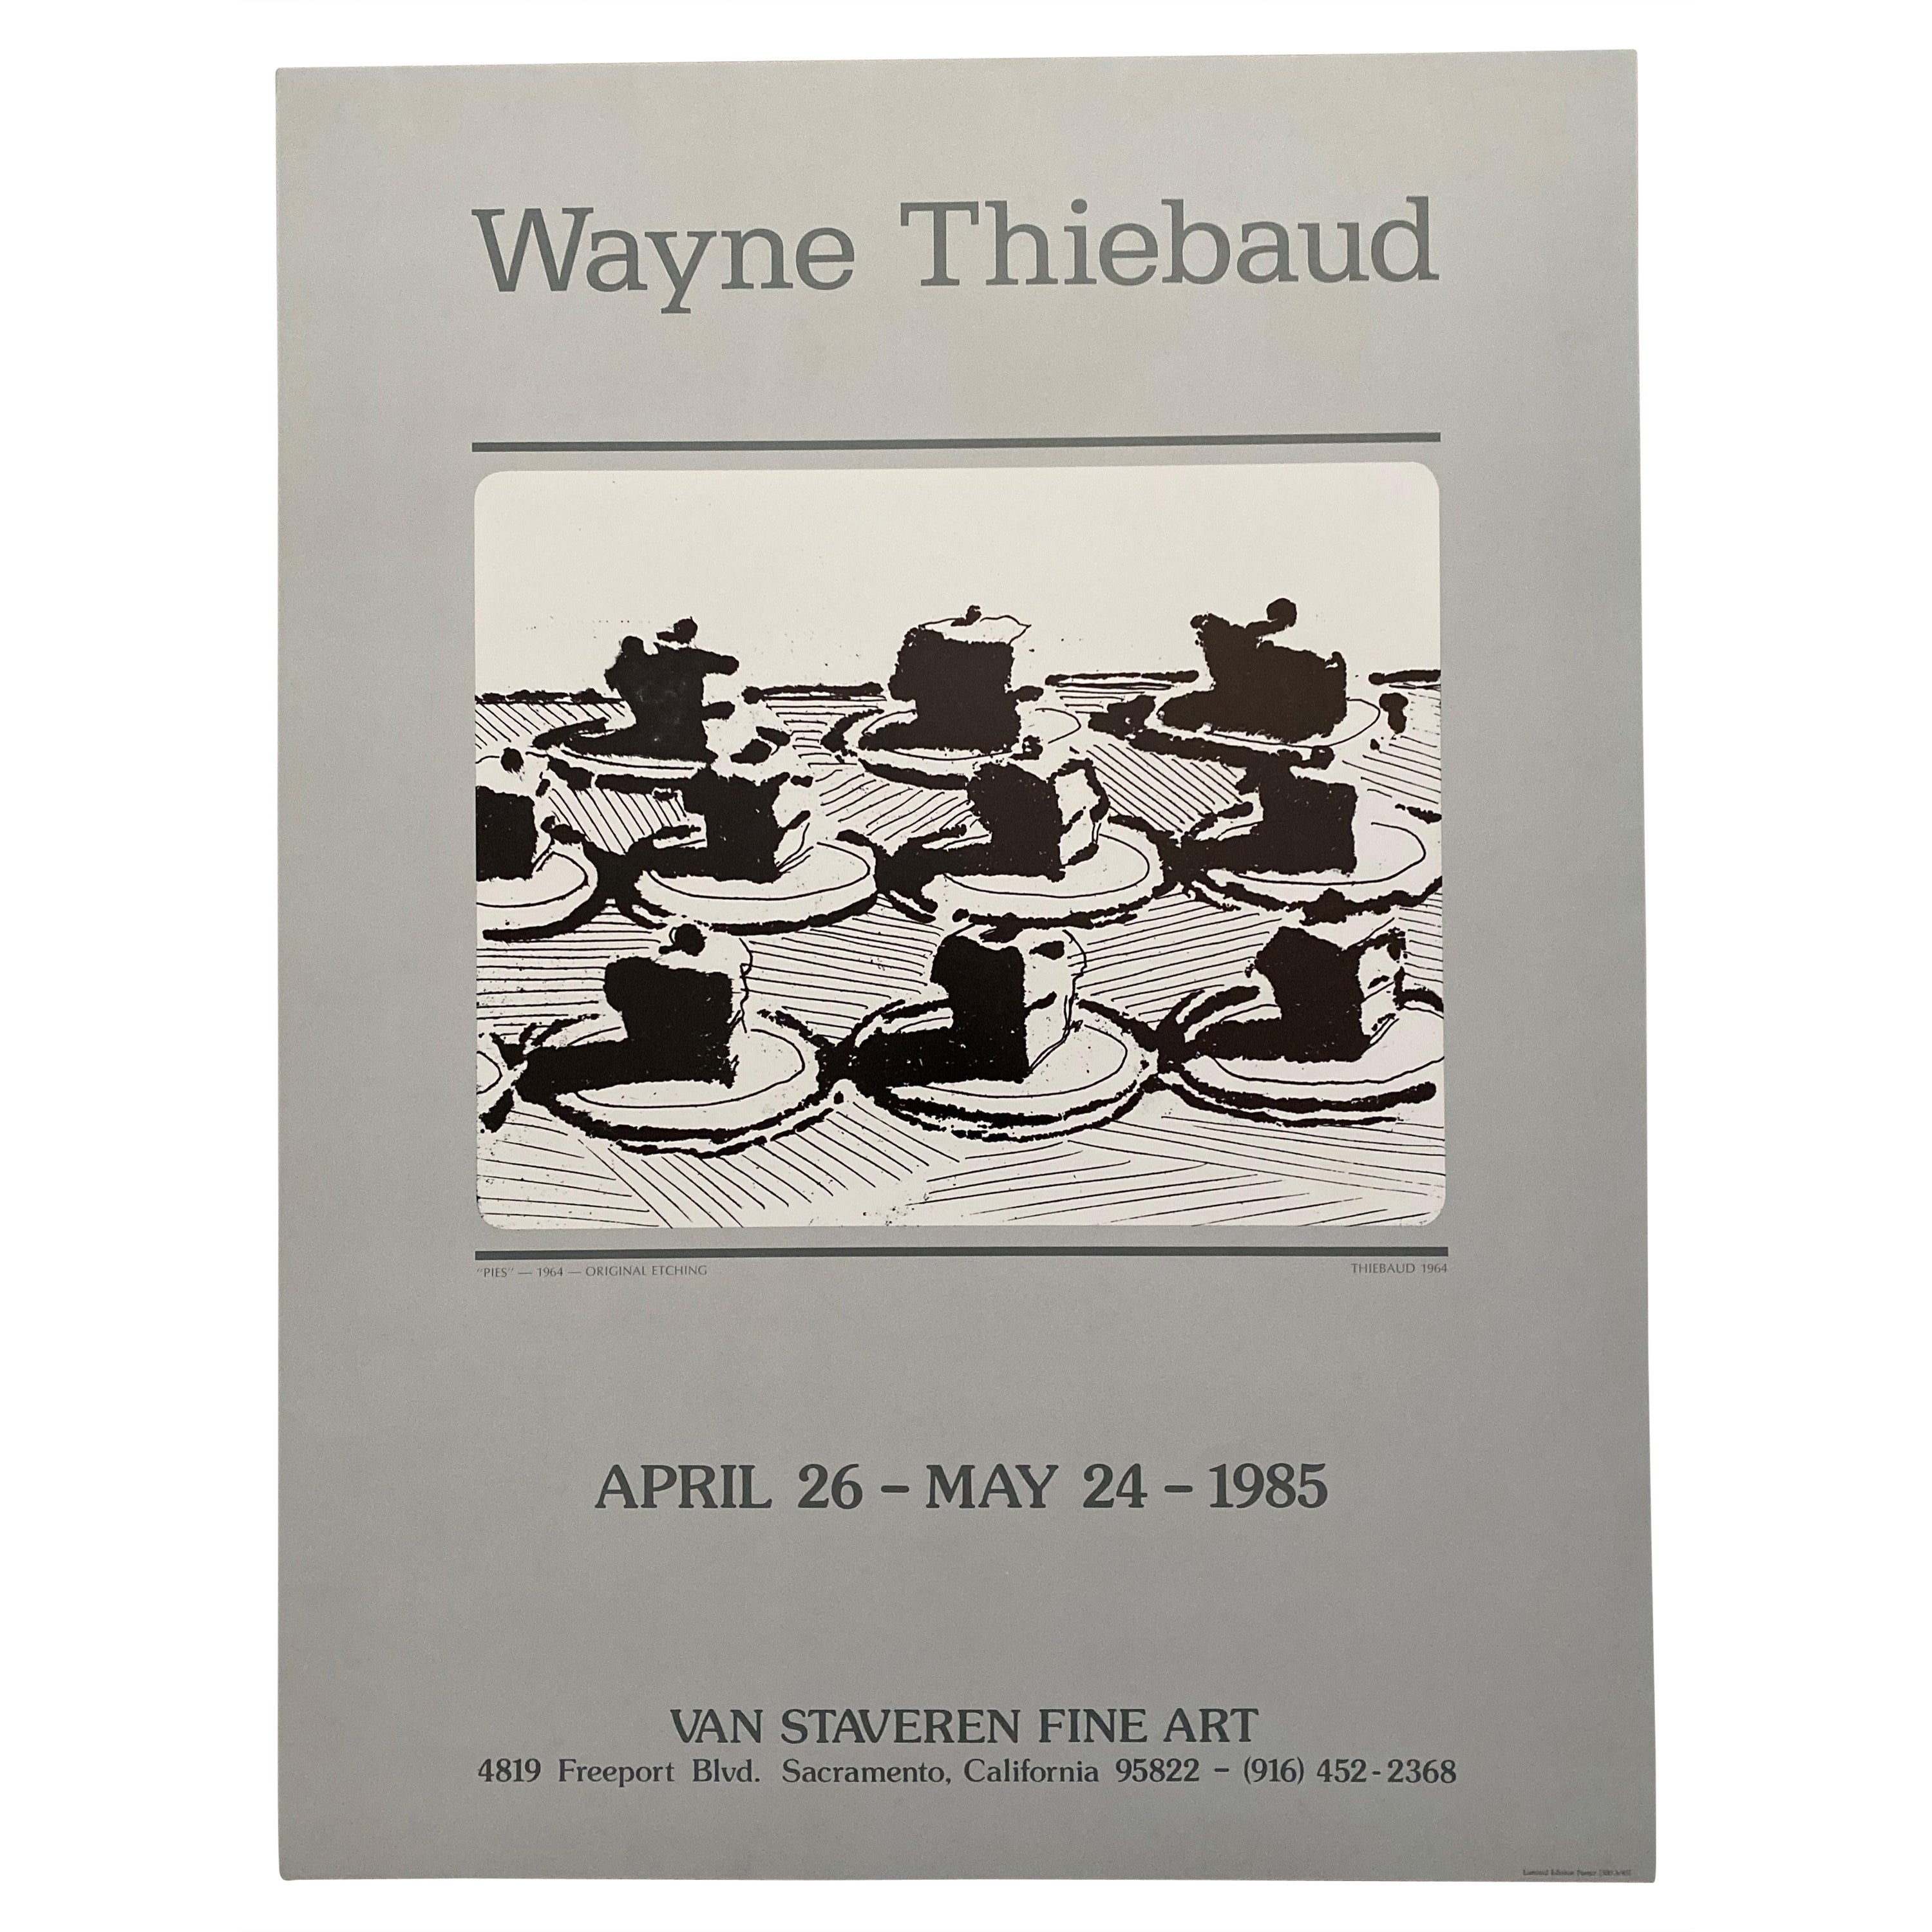 1985 Wayne Thiebaud "Pies" Limited Edition Exhibition Print For Sale